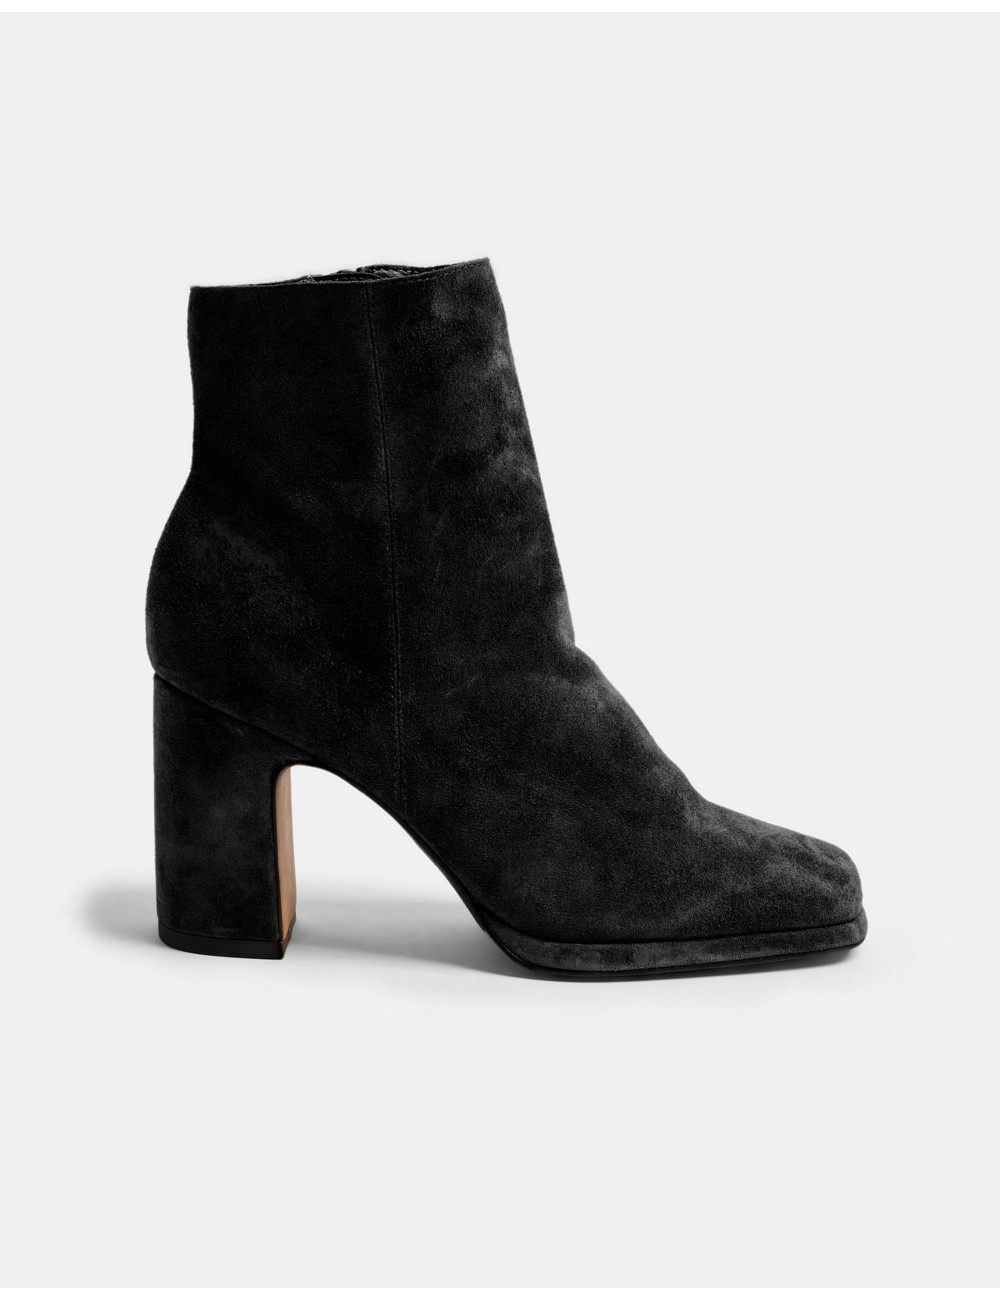 Topshop suede boots in black